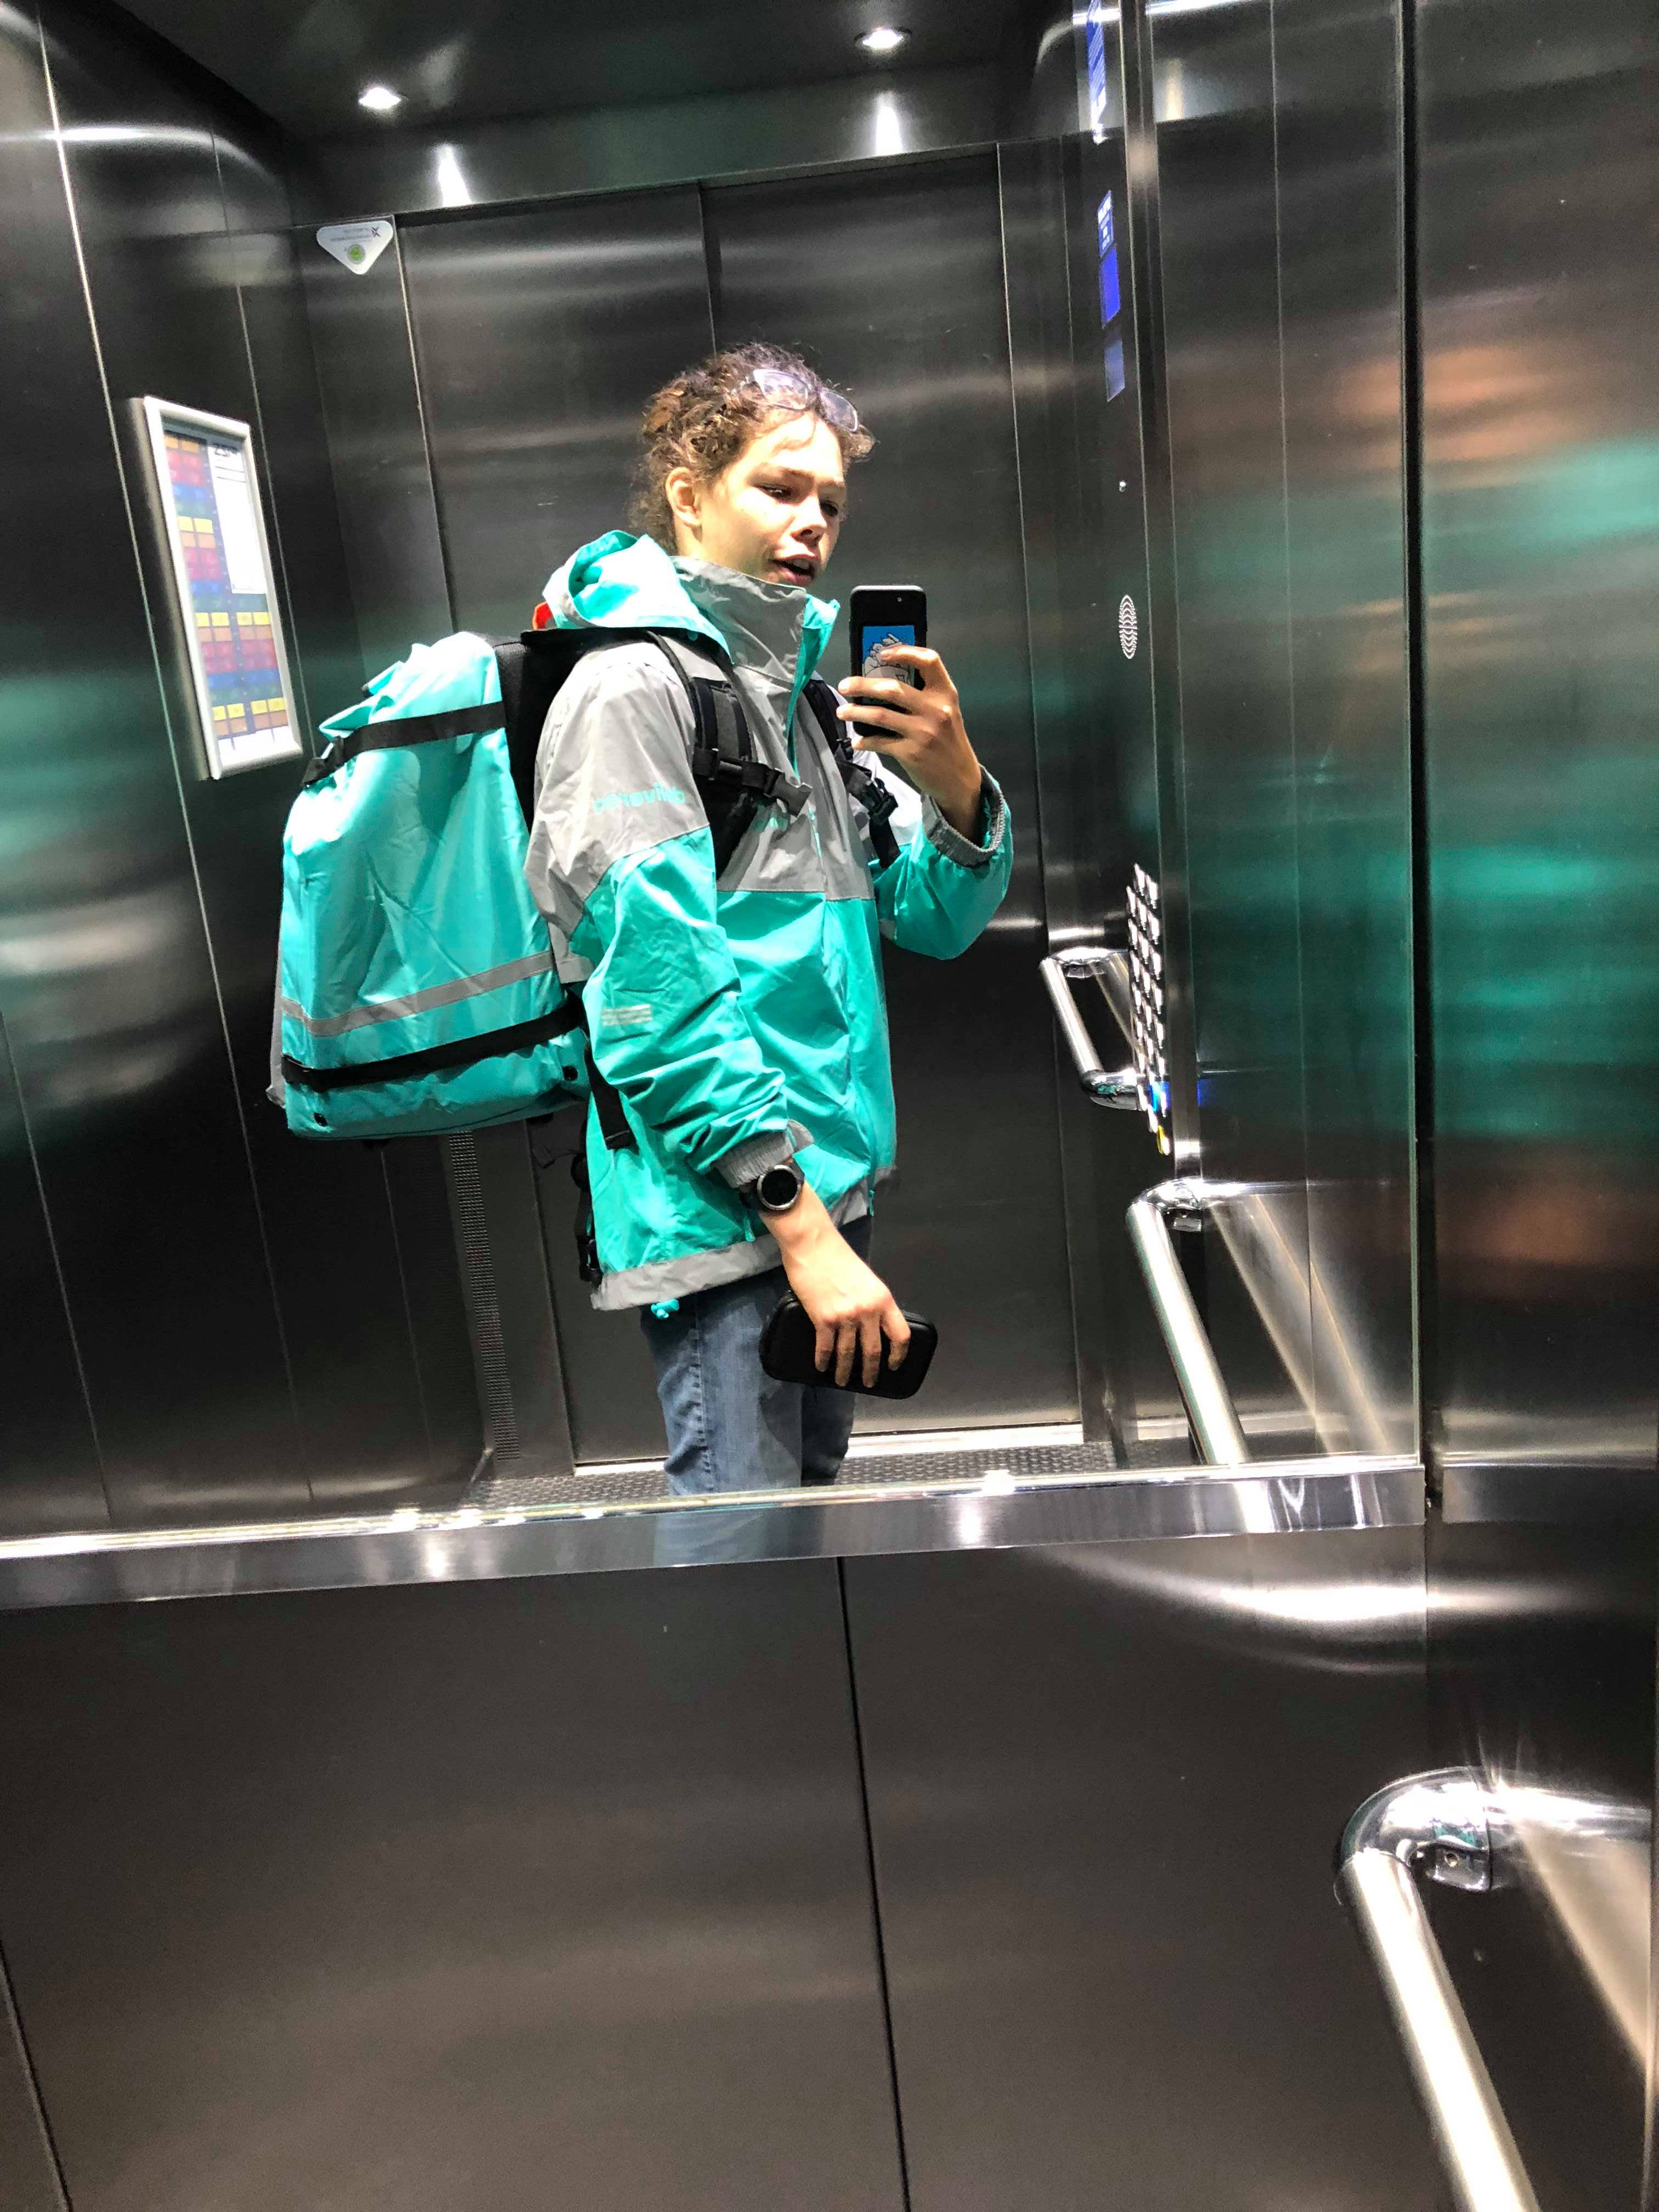 What to Expect from 1st Deliveroo Rider Shift in Amsterdam